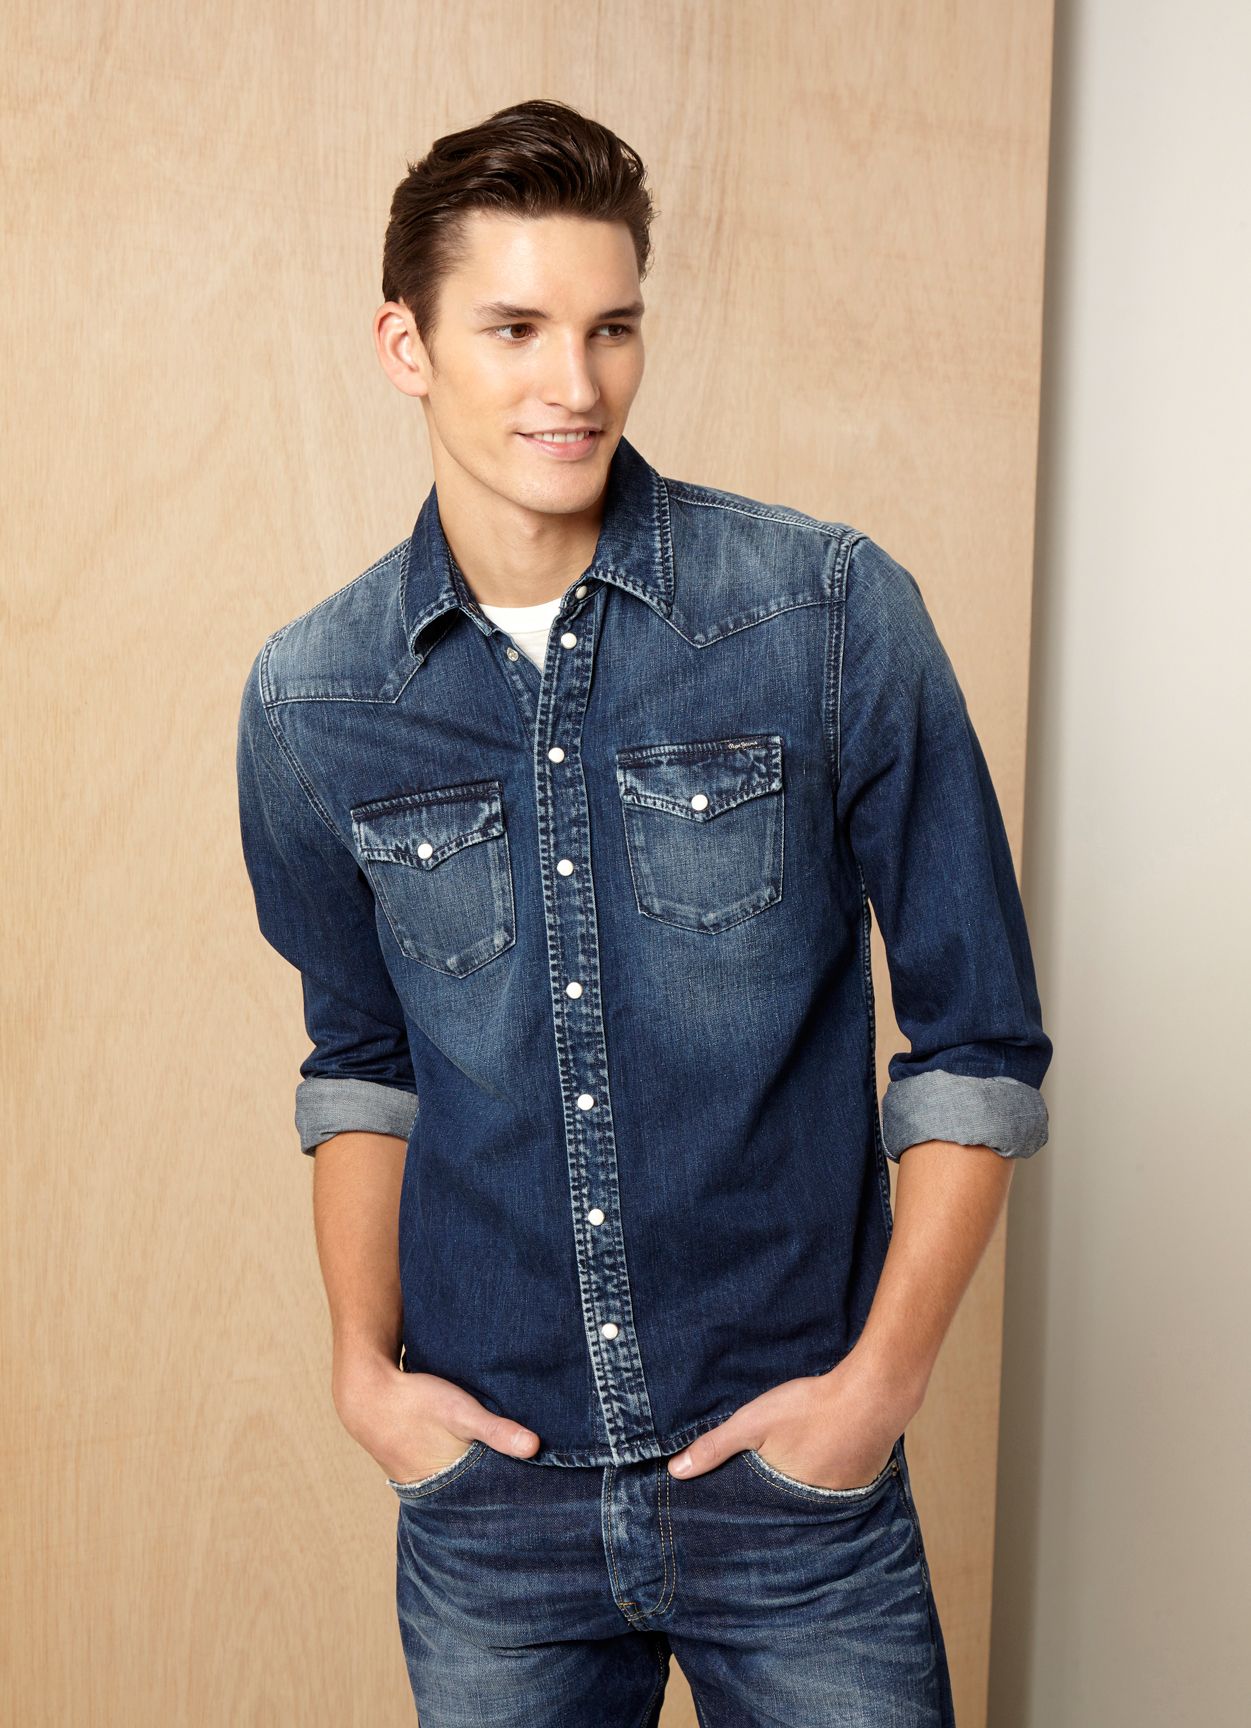 Dominik Bauer Goes Casual for Pepe Jeans